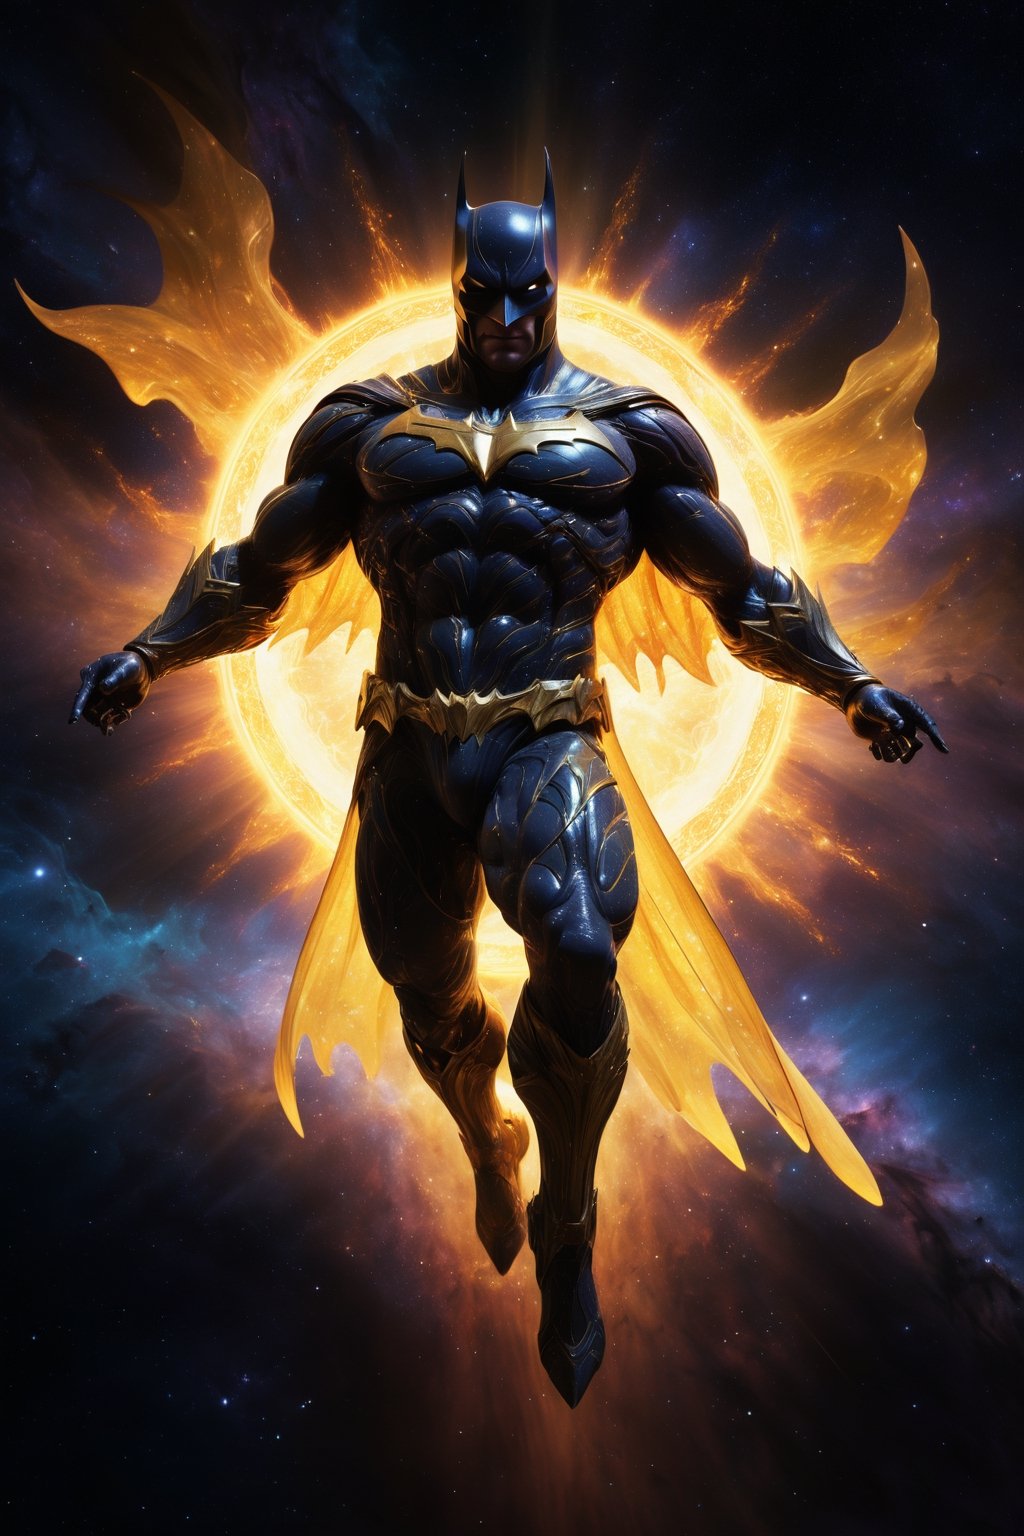 A god-like Batman, his form radiating with divine energy, stands against the backdrop of a swirling cosmic nebula. With a determined expression, he holds the sun in his outstretched hands, the immense power of the star coursing through his veins. The scene is rendered with incredible detail, from the intricate patterns on armor to the turbulent surface of the sun. The colors are vibrant and awe-inspiring, with the blazing yellow of the sun contrasting against the dark void of space. The image is meticulously processed, with realistic lighting and effects that make it seem like a photograph. The overall effect is cinematic, capturing the epic scale and grandeur of the moment.